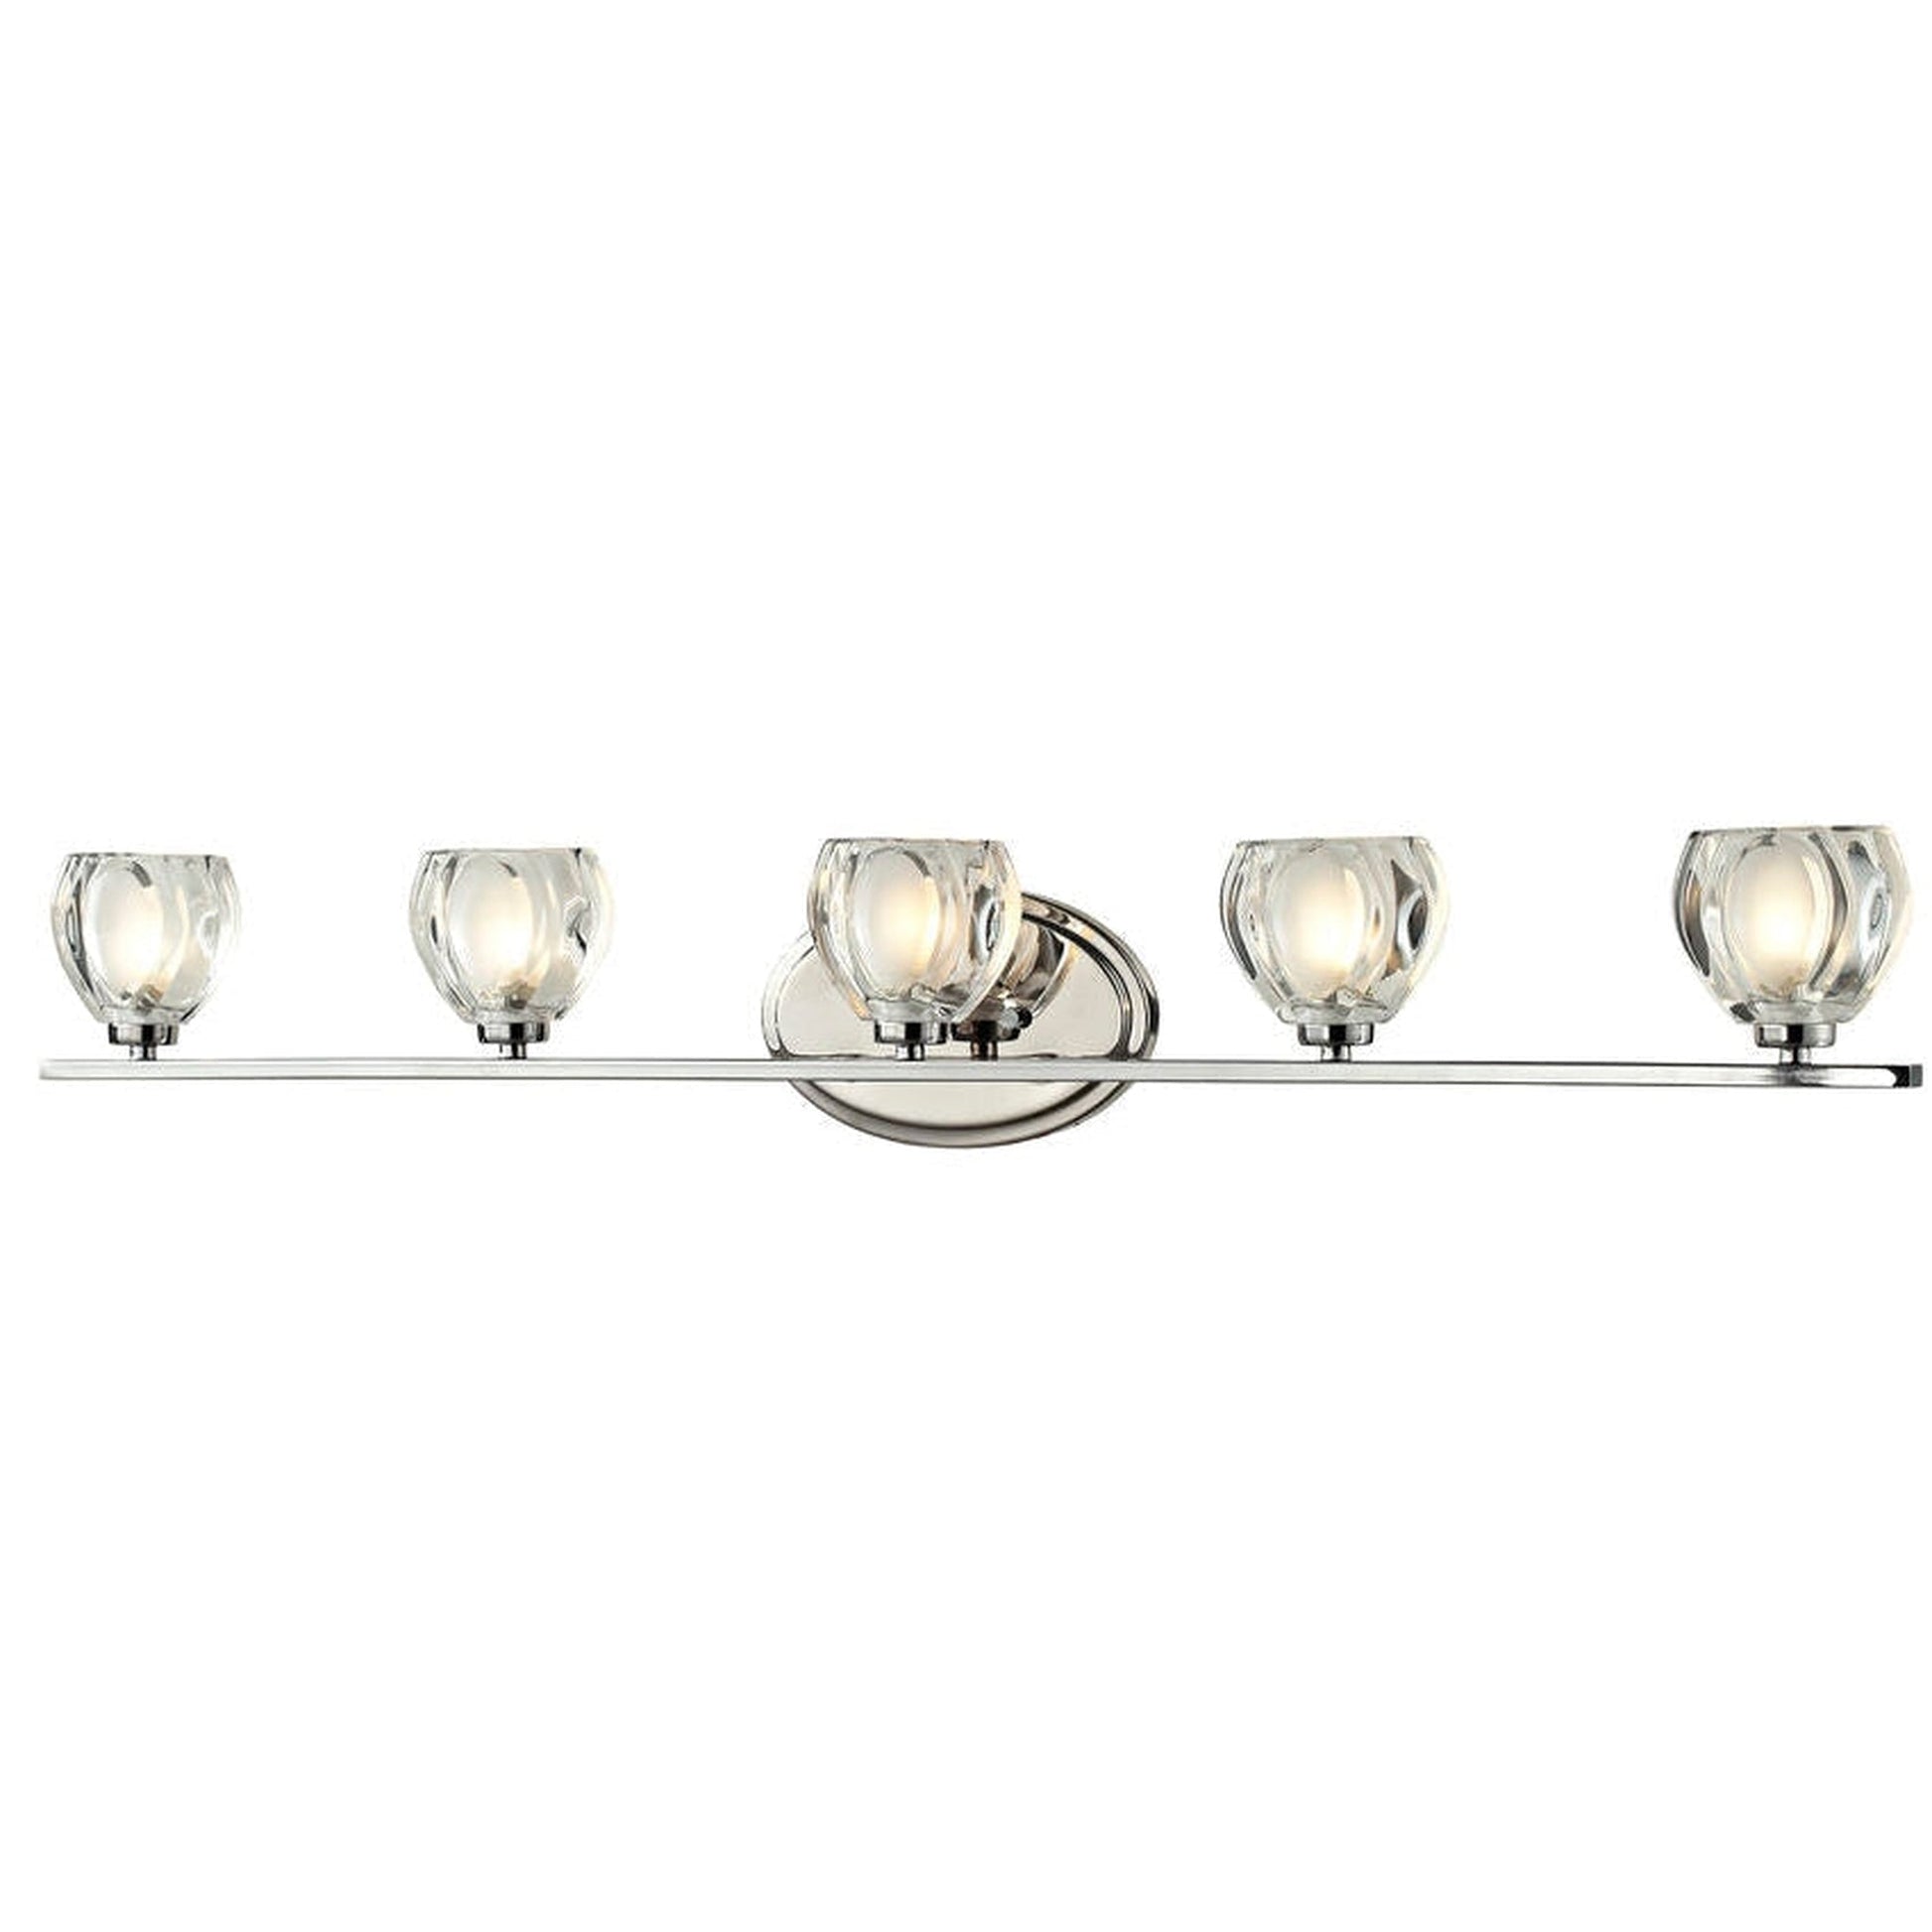 Z-Lite Hale 38" 5-Light Chrome Vanity Light With Clear Frosted Glass Shade